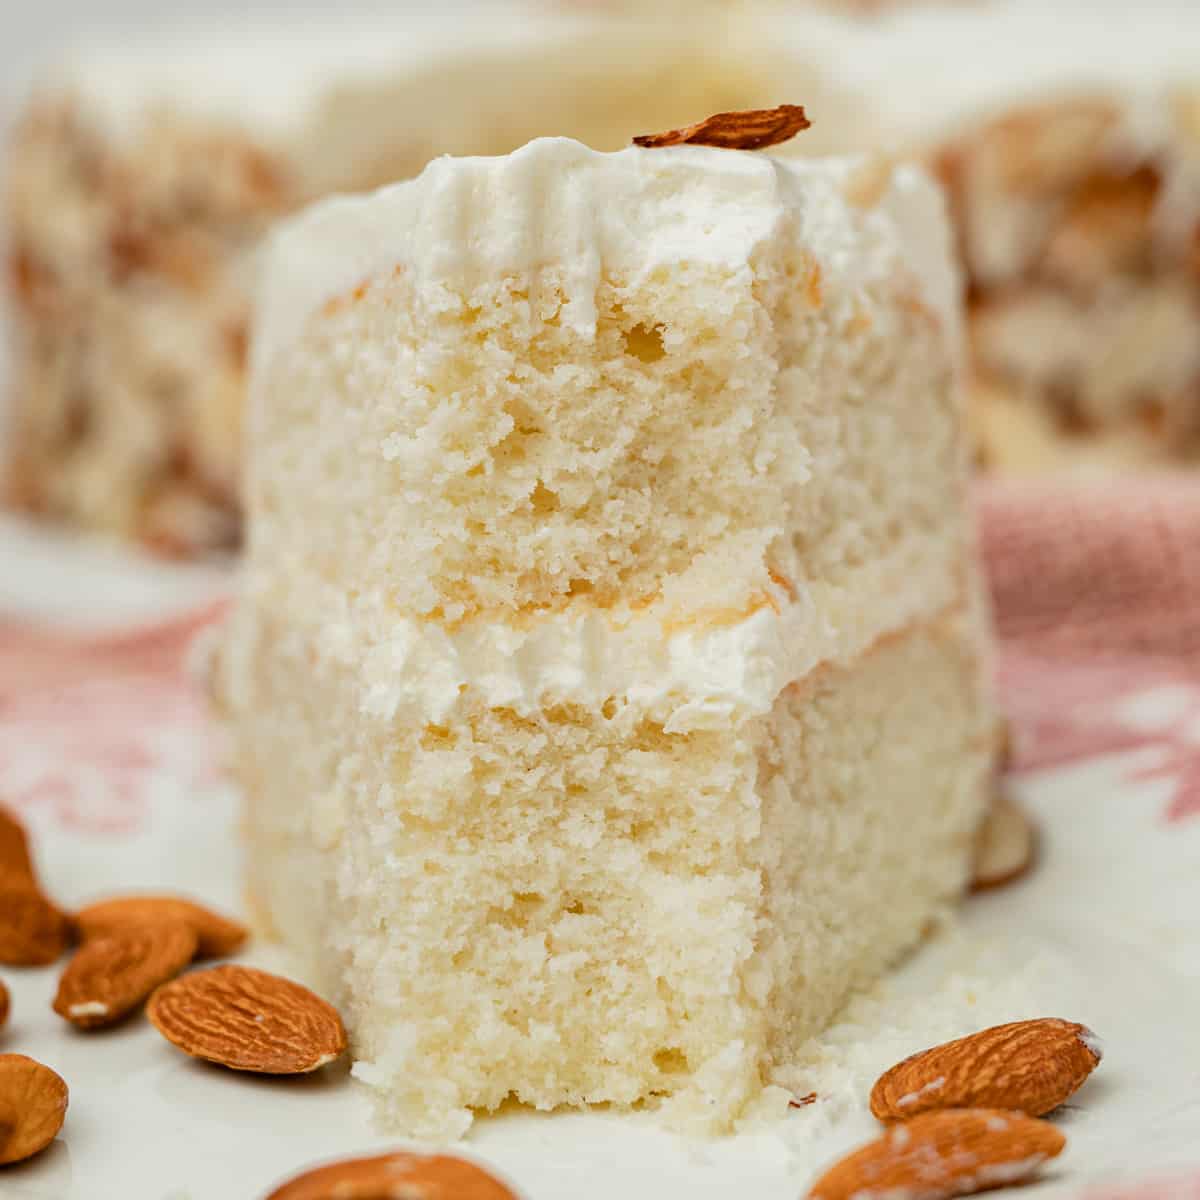 a slice of almond cream cake on a plate with a bite out